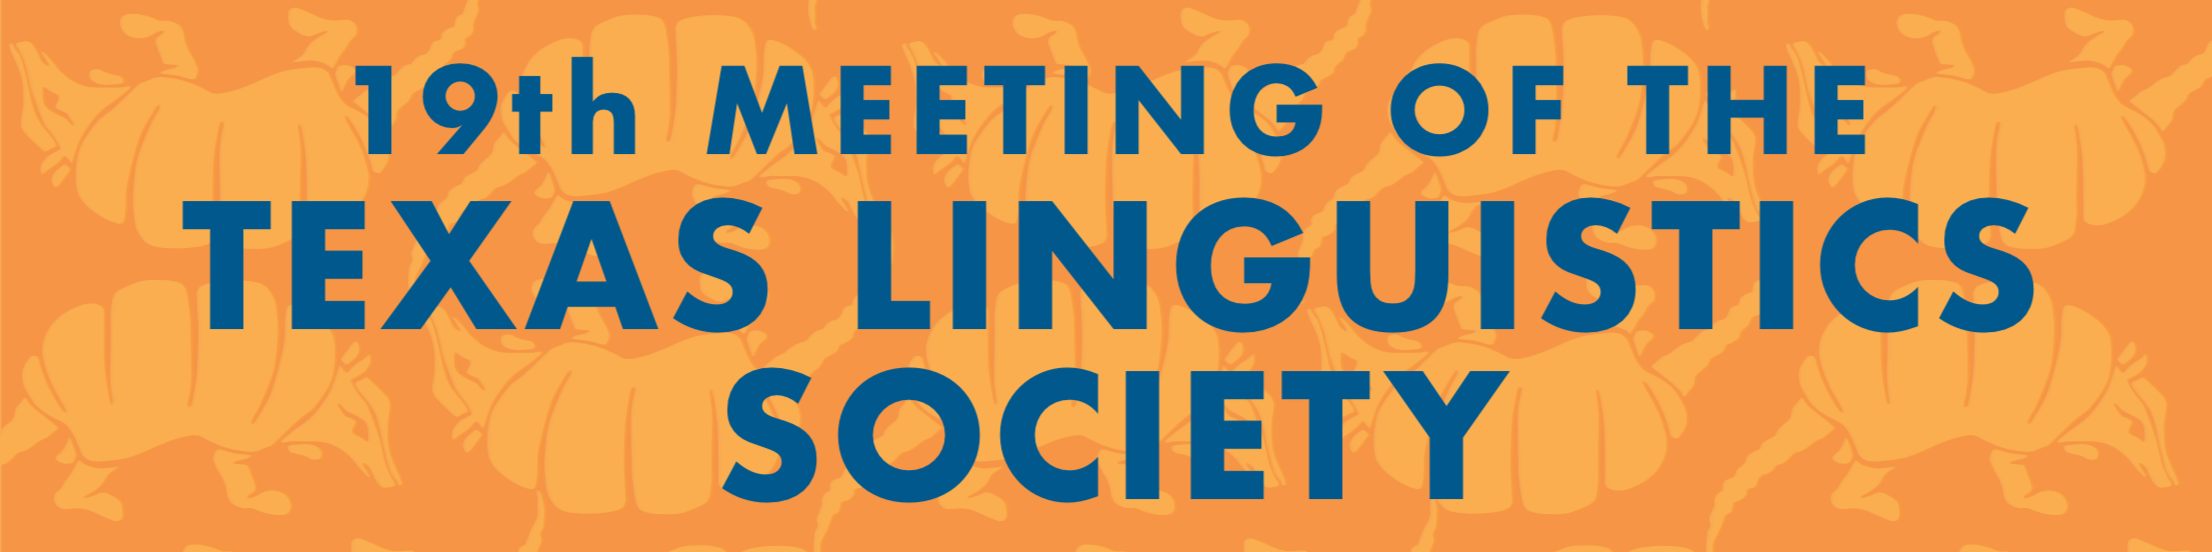 19th Meeting of the Texas Linguistics Society